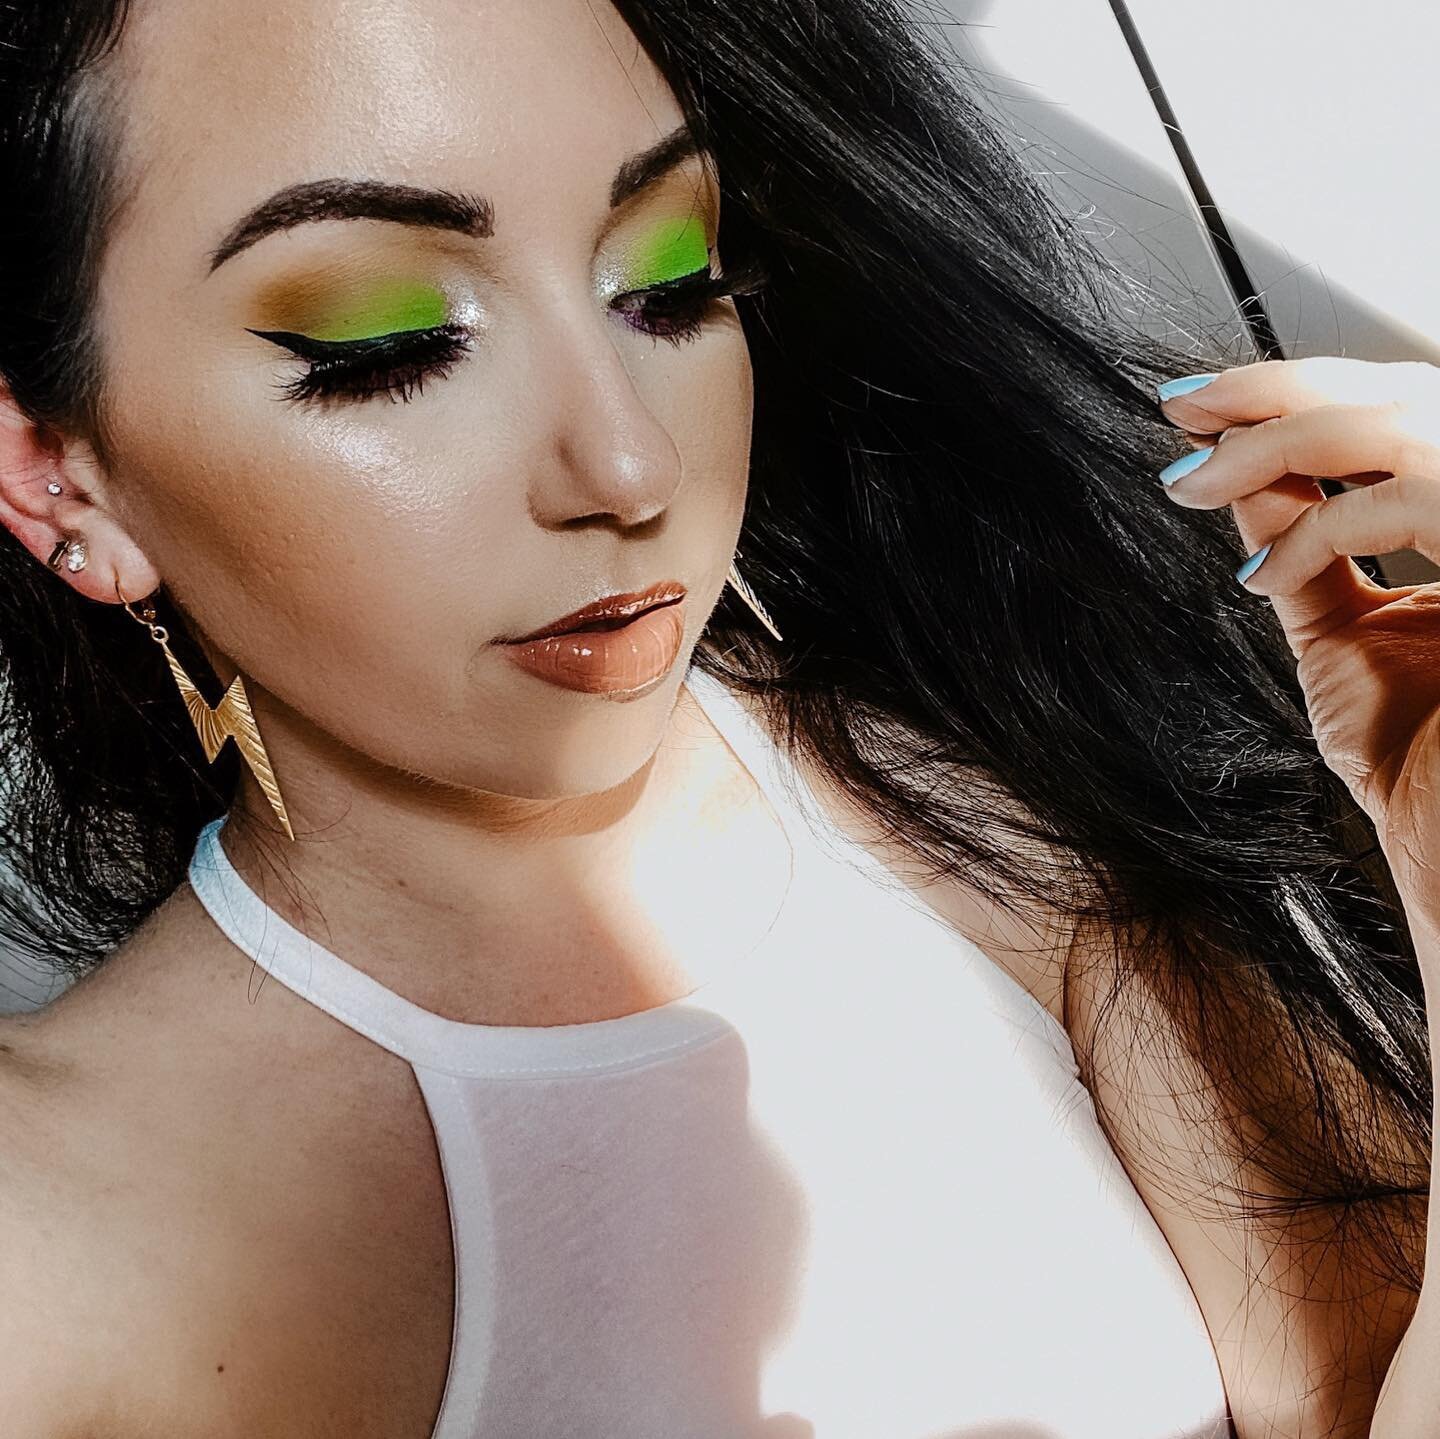 ✨🌿⚡️r e t r o p a r a d i s e 🎥 the elf giveaway winner from the vlog was @sting_rae11 &amp; was contacted! [also have a video on this look - it was the recent first impressions vid] ✖️✖️

&bull;&bull;&bull; makeup details &bull;&bull;&bull;
◇ @cov